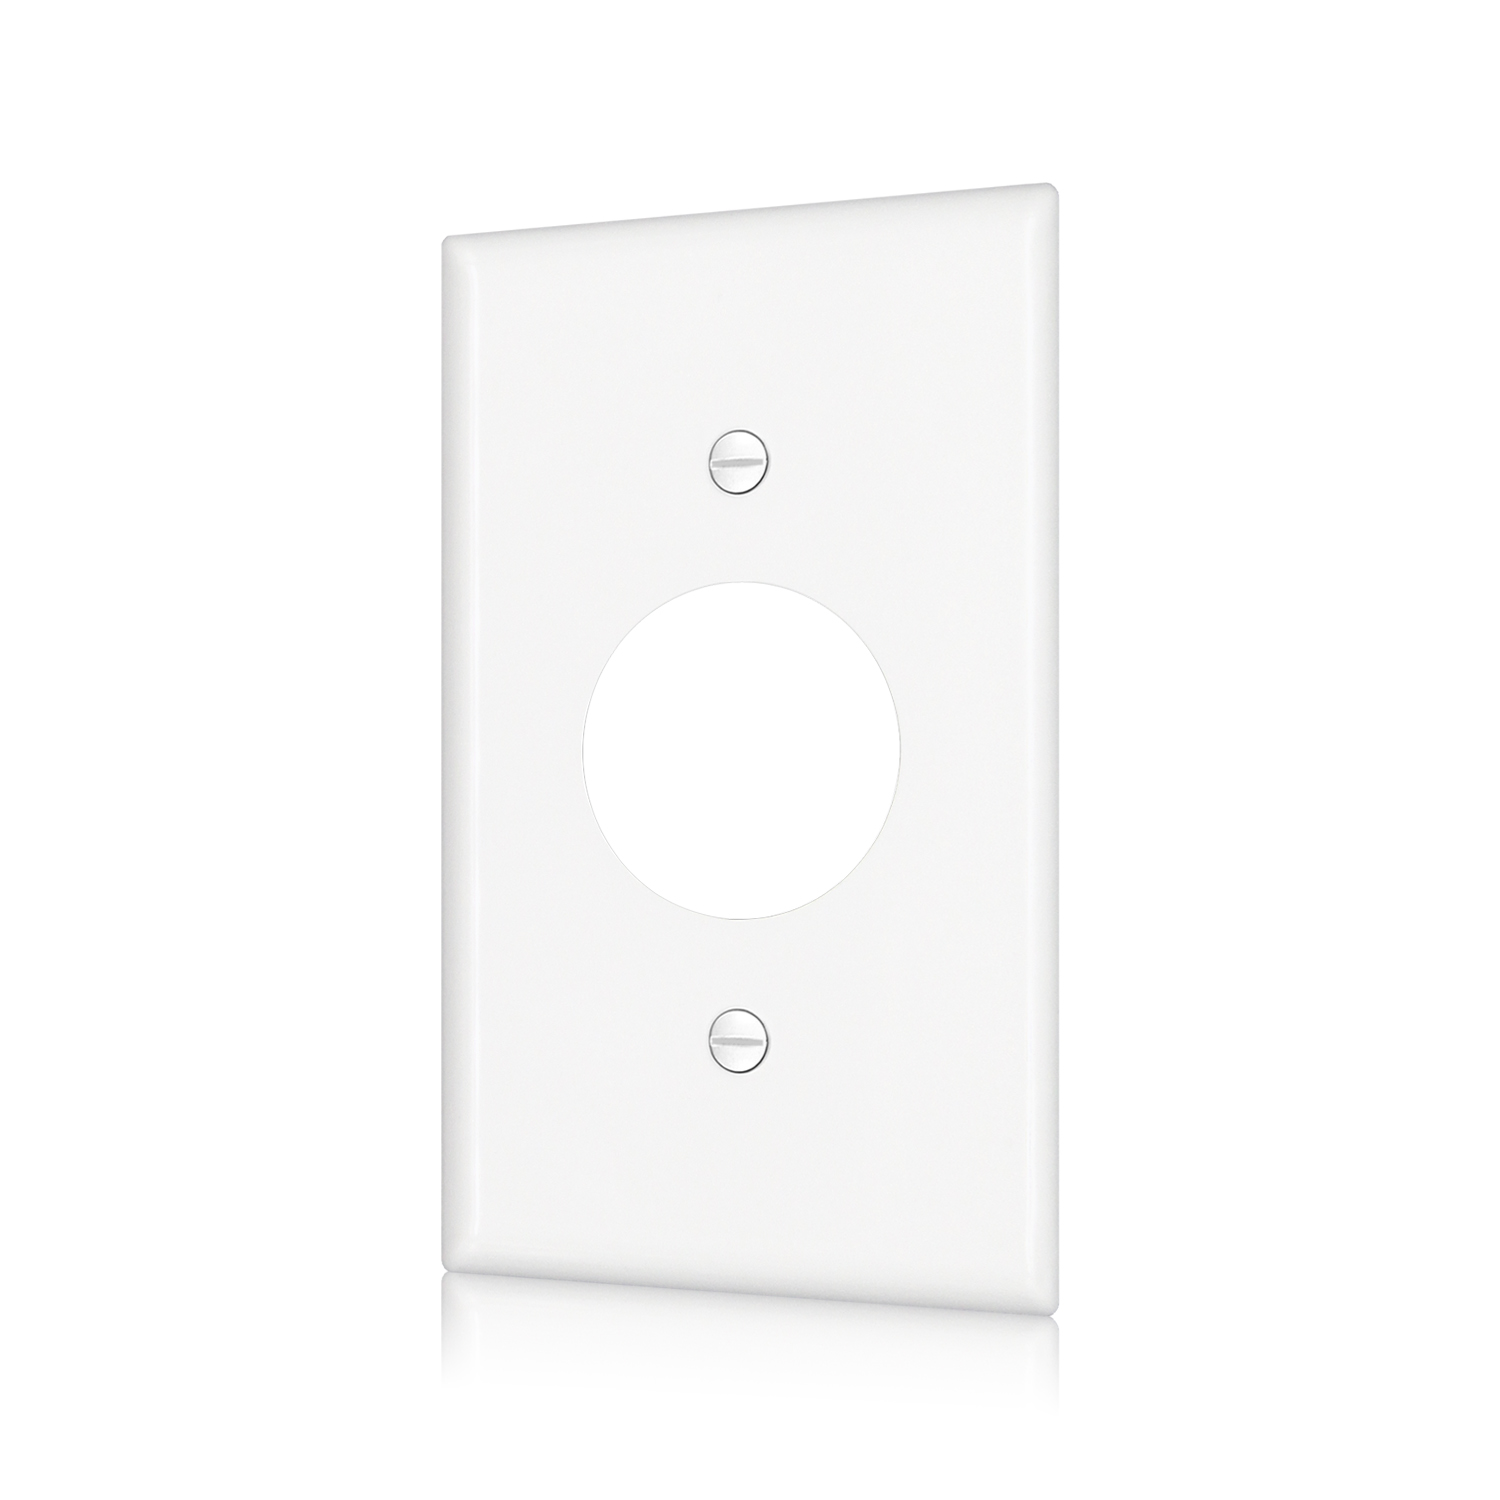 UL Listed Decorative Wall Plates 1 Gang Single Receptacle Wall Plate, SSC-CPP